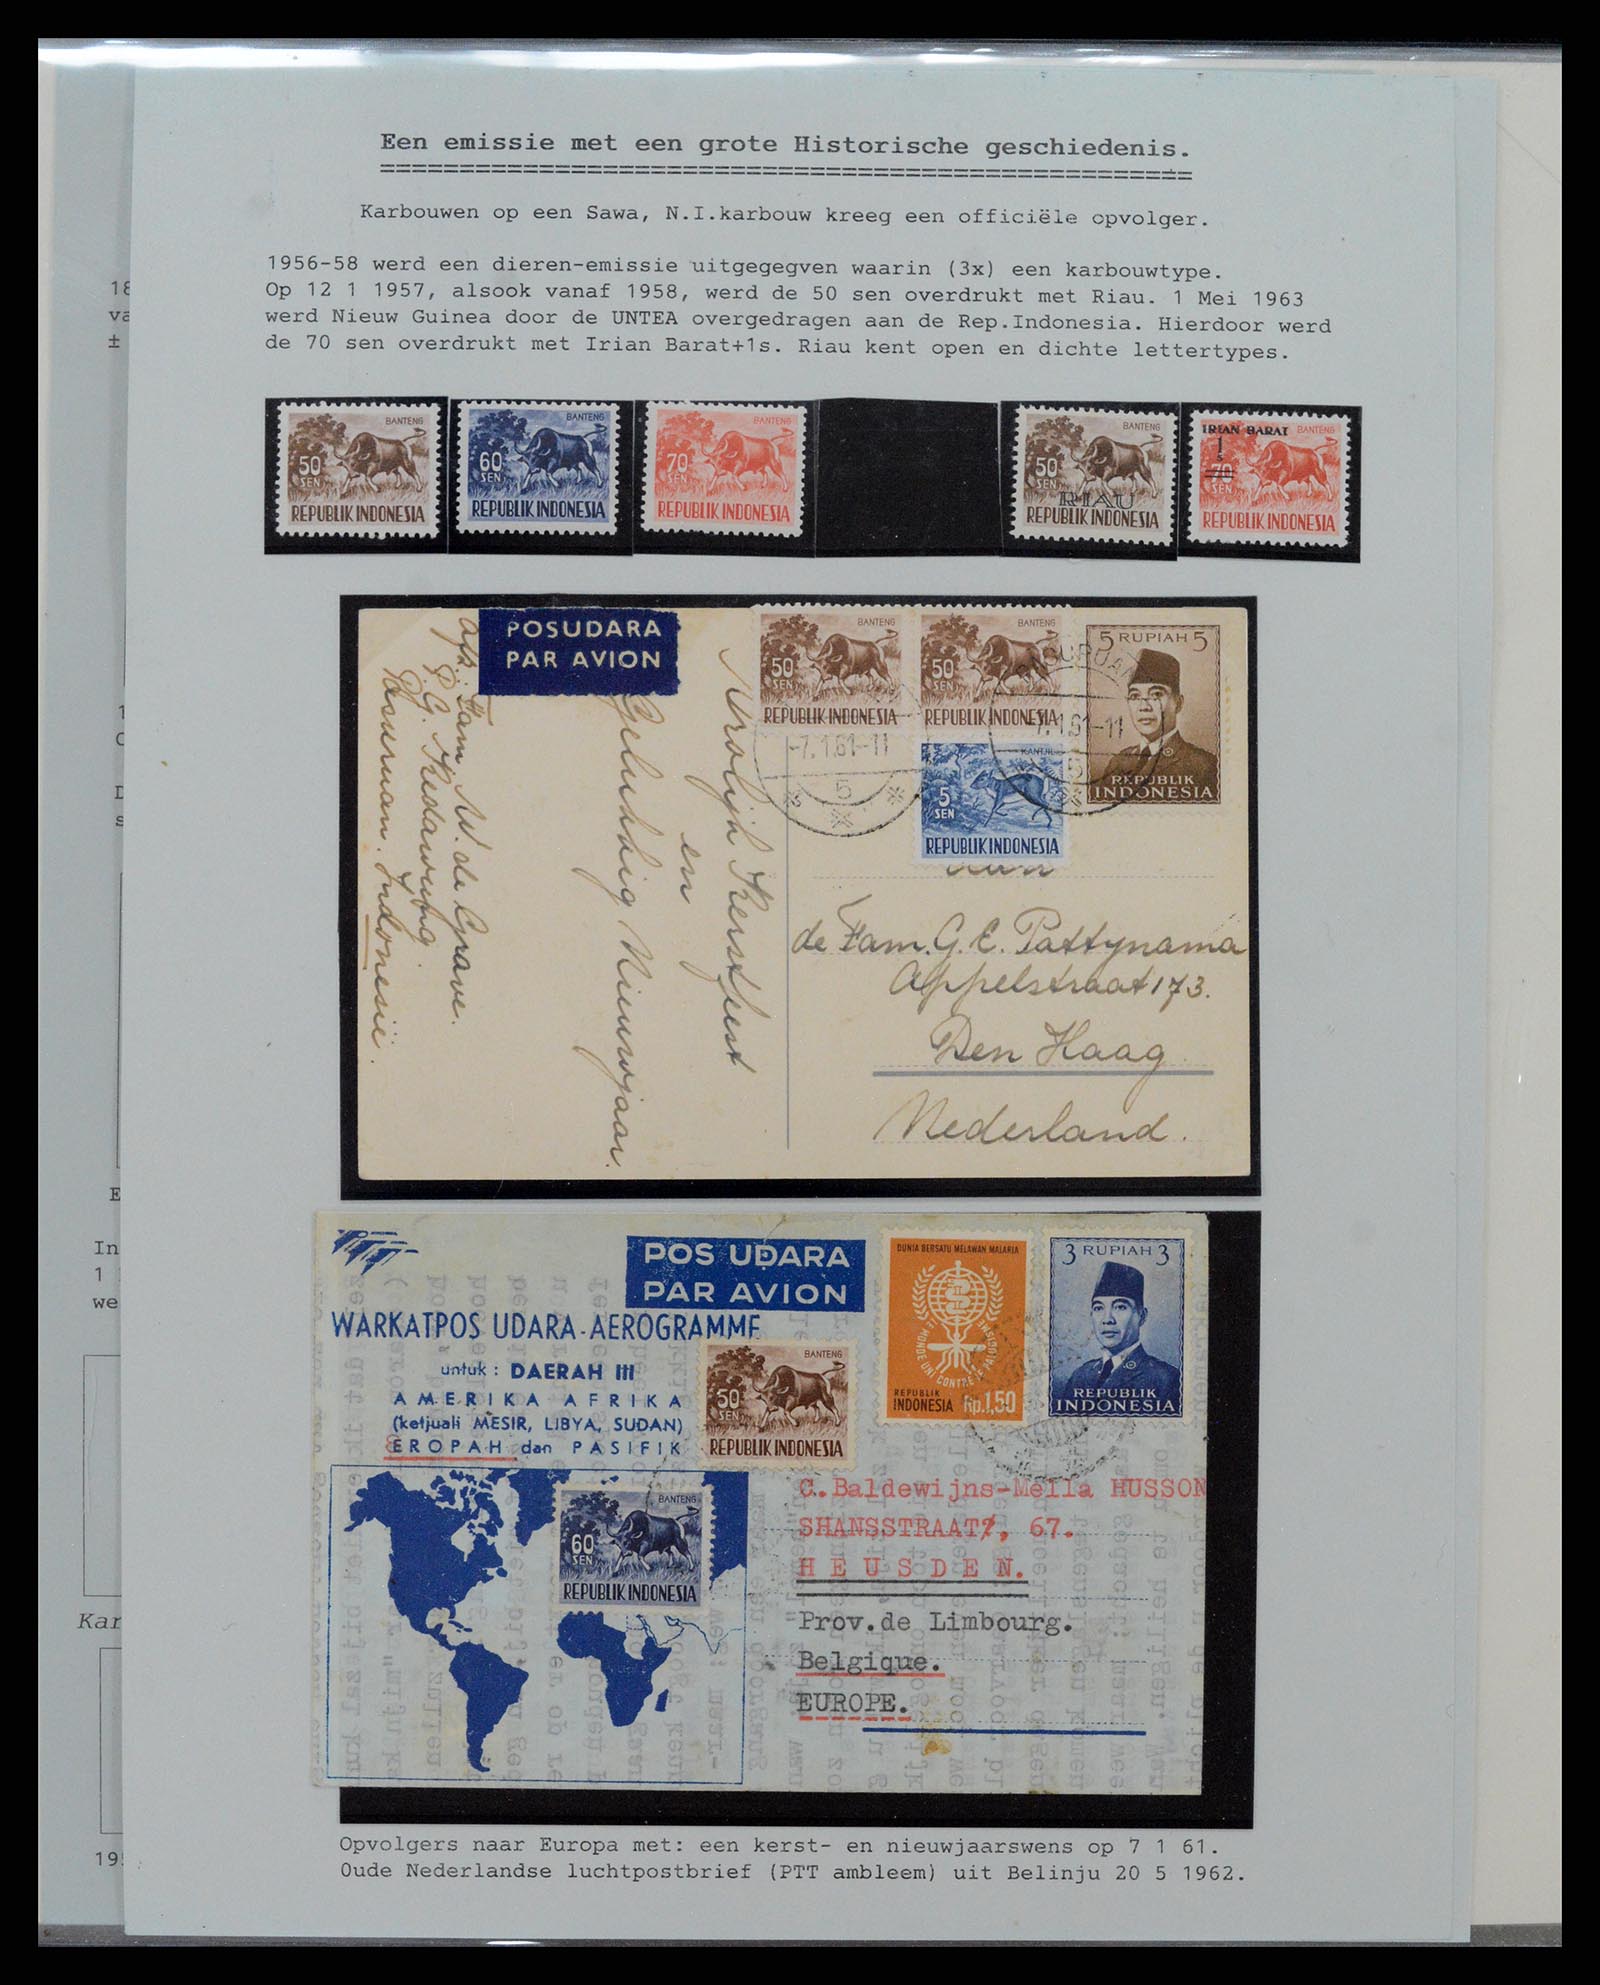 37689 034 - Stamp collection 37689 Japanese occupation Dutch East Indies and interim